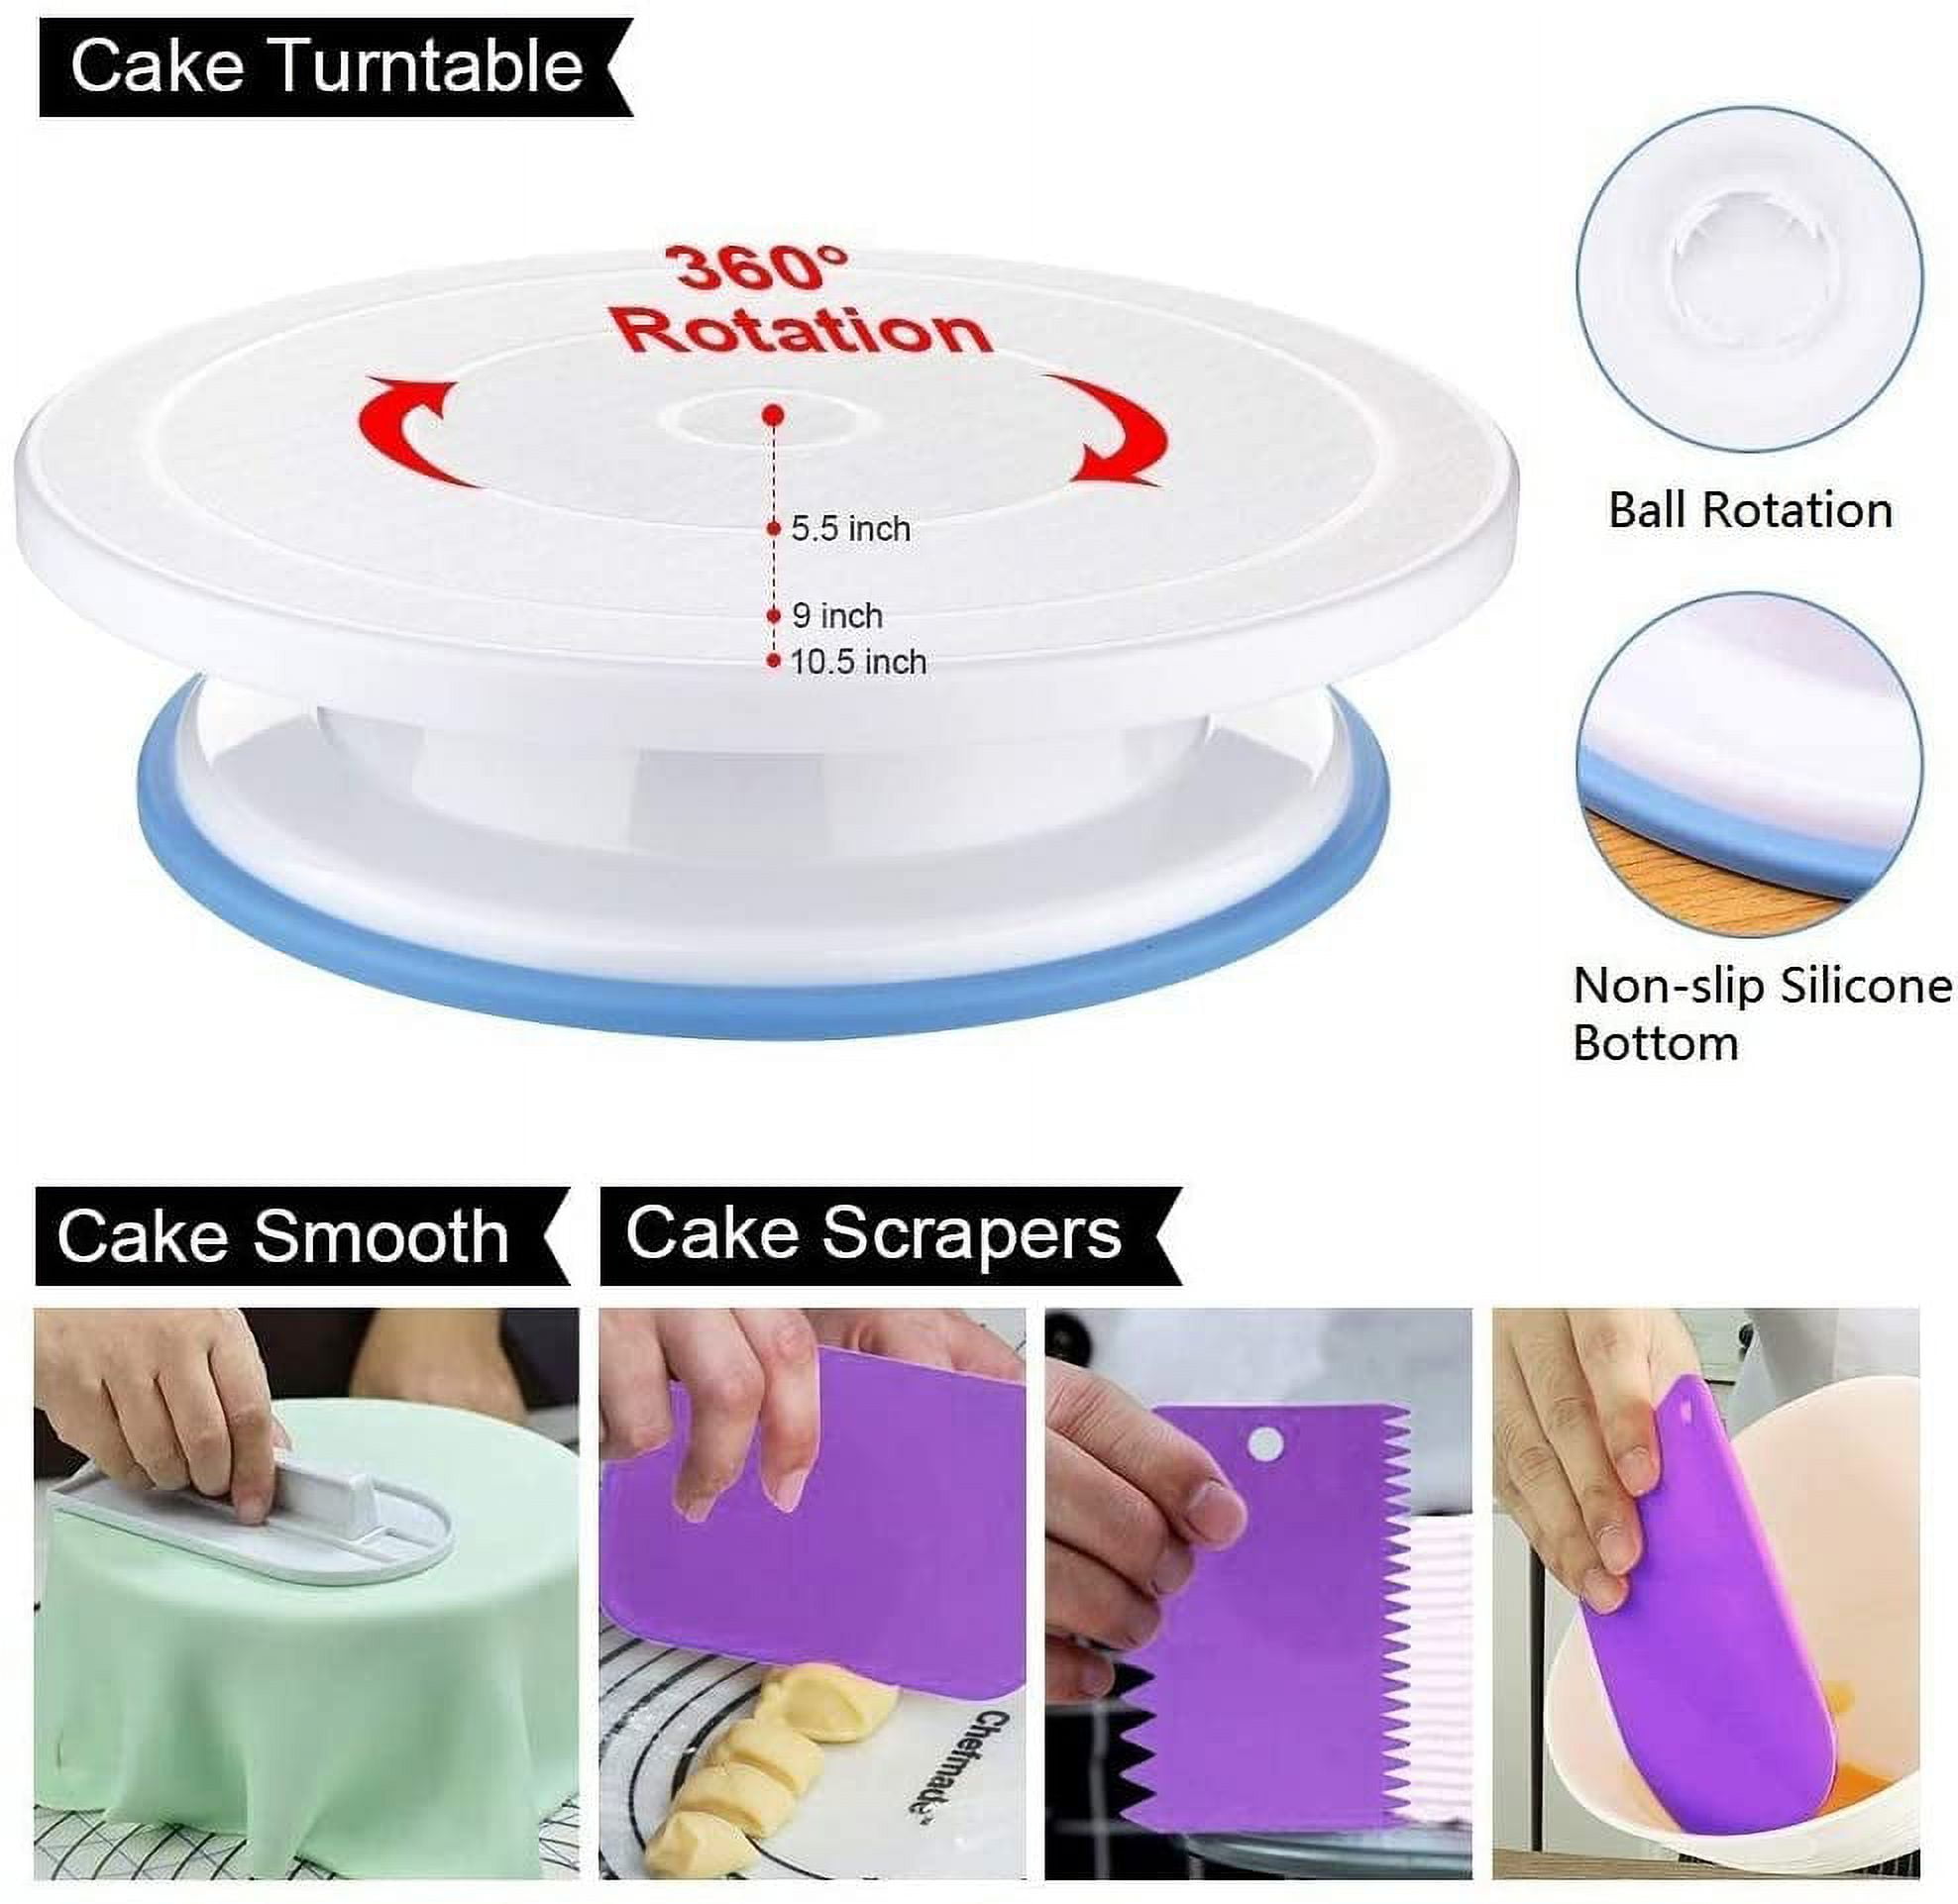 Decorating Supplies, 493 Pcs Cake Decorating Kit 3 Packs Springform Cake Pans, Cake Rotating Turntable, 48 Piping Icing Tips, 7 Russian Nozzles